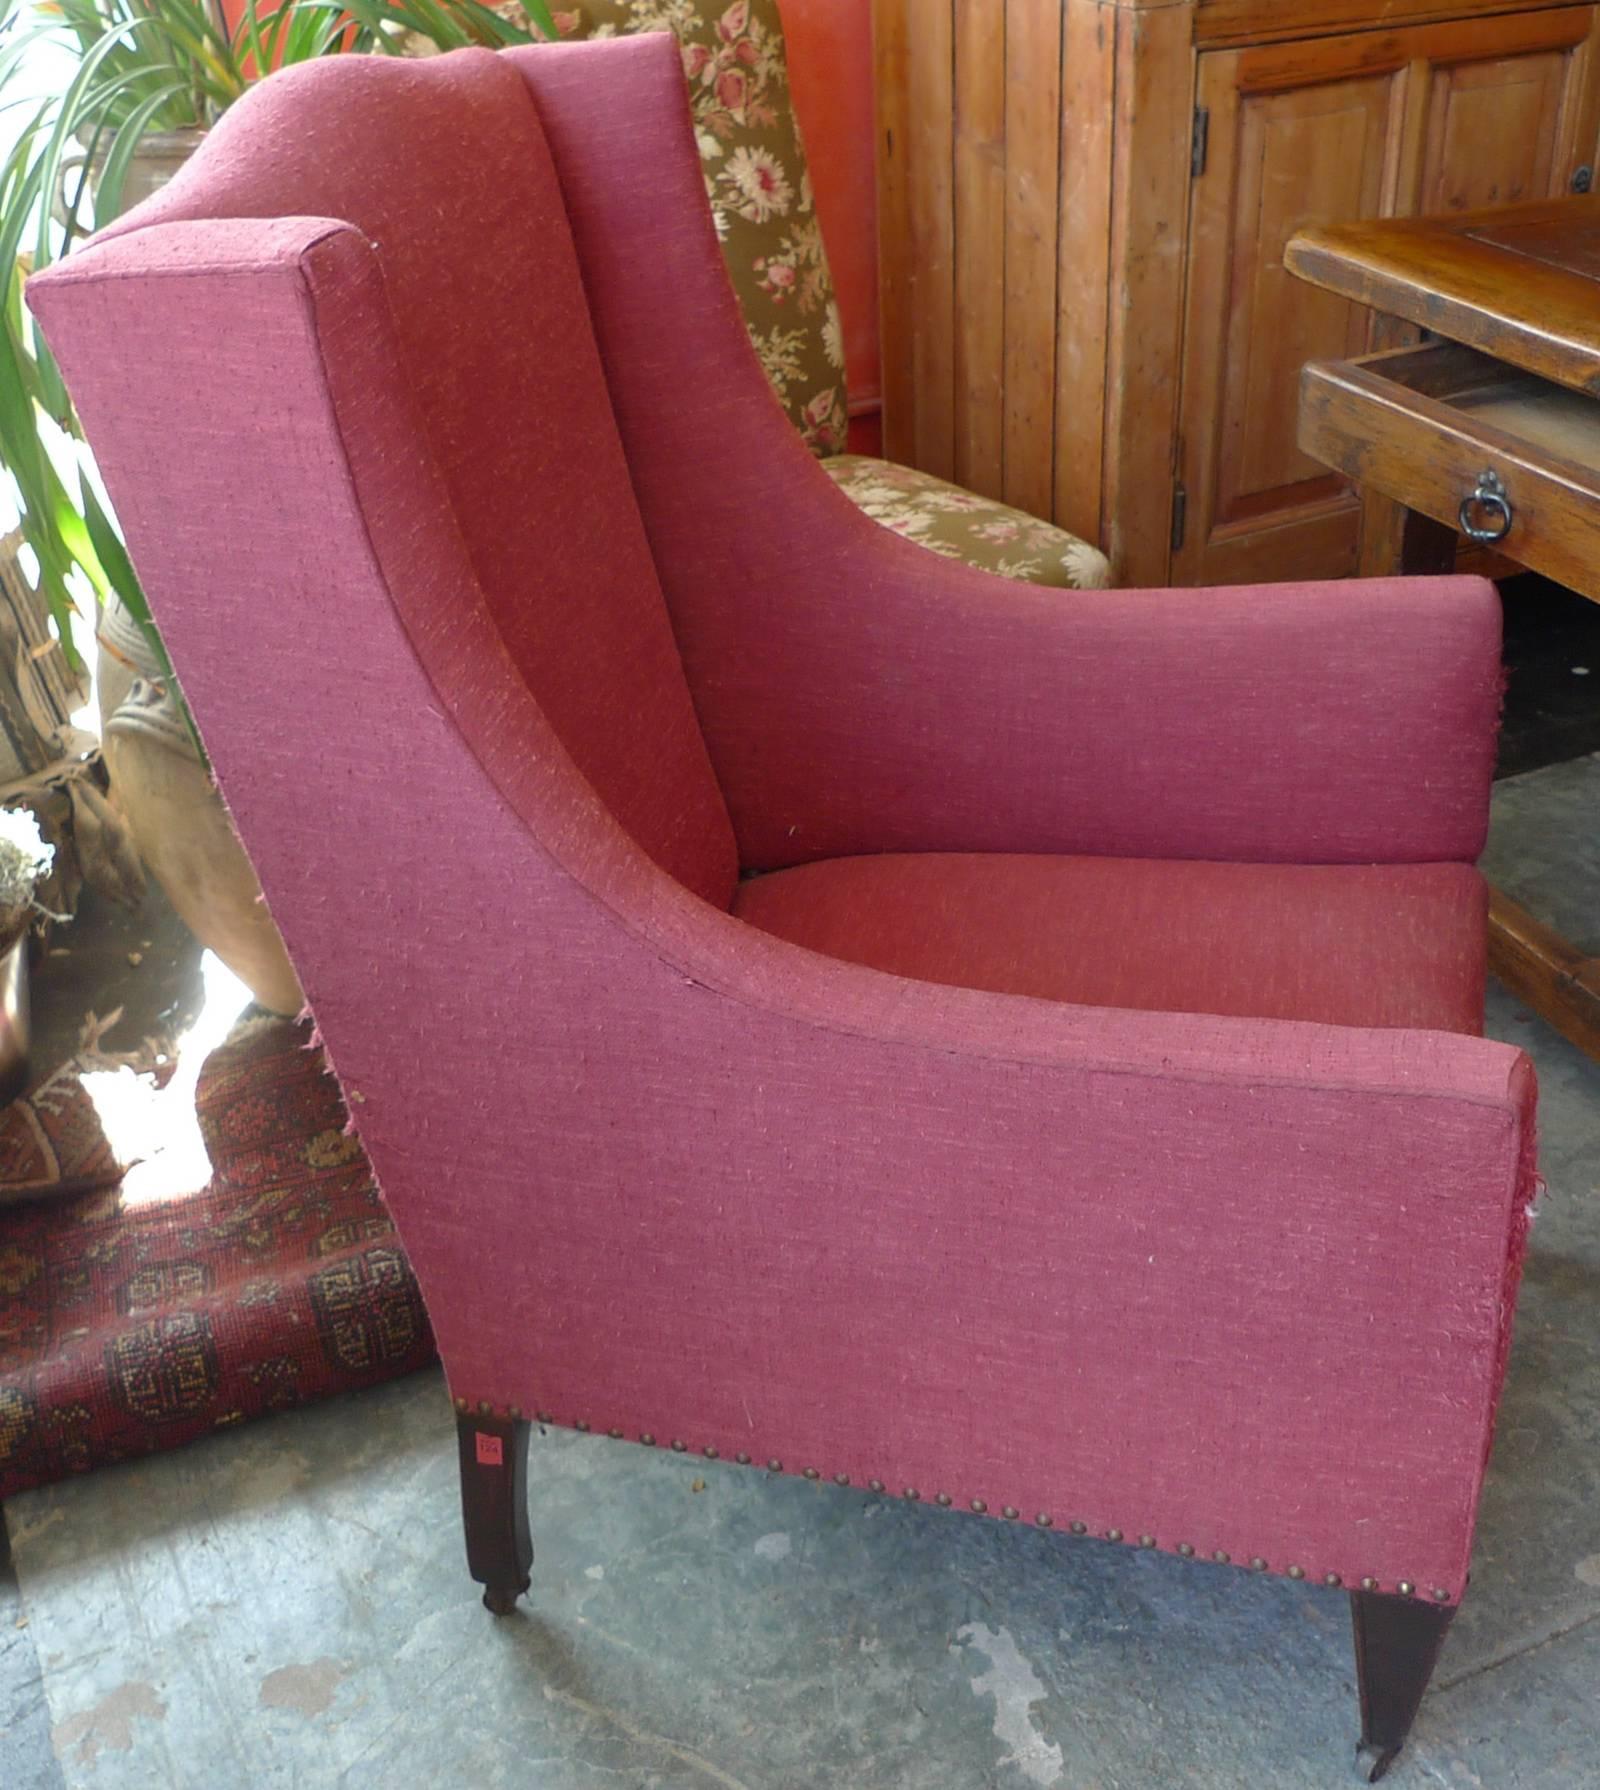 French 19th Century Stained Walnut Wing Backed Armchair on Four Castors. Sold as is.